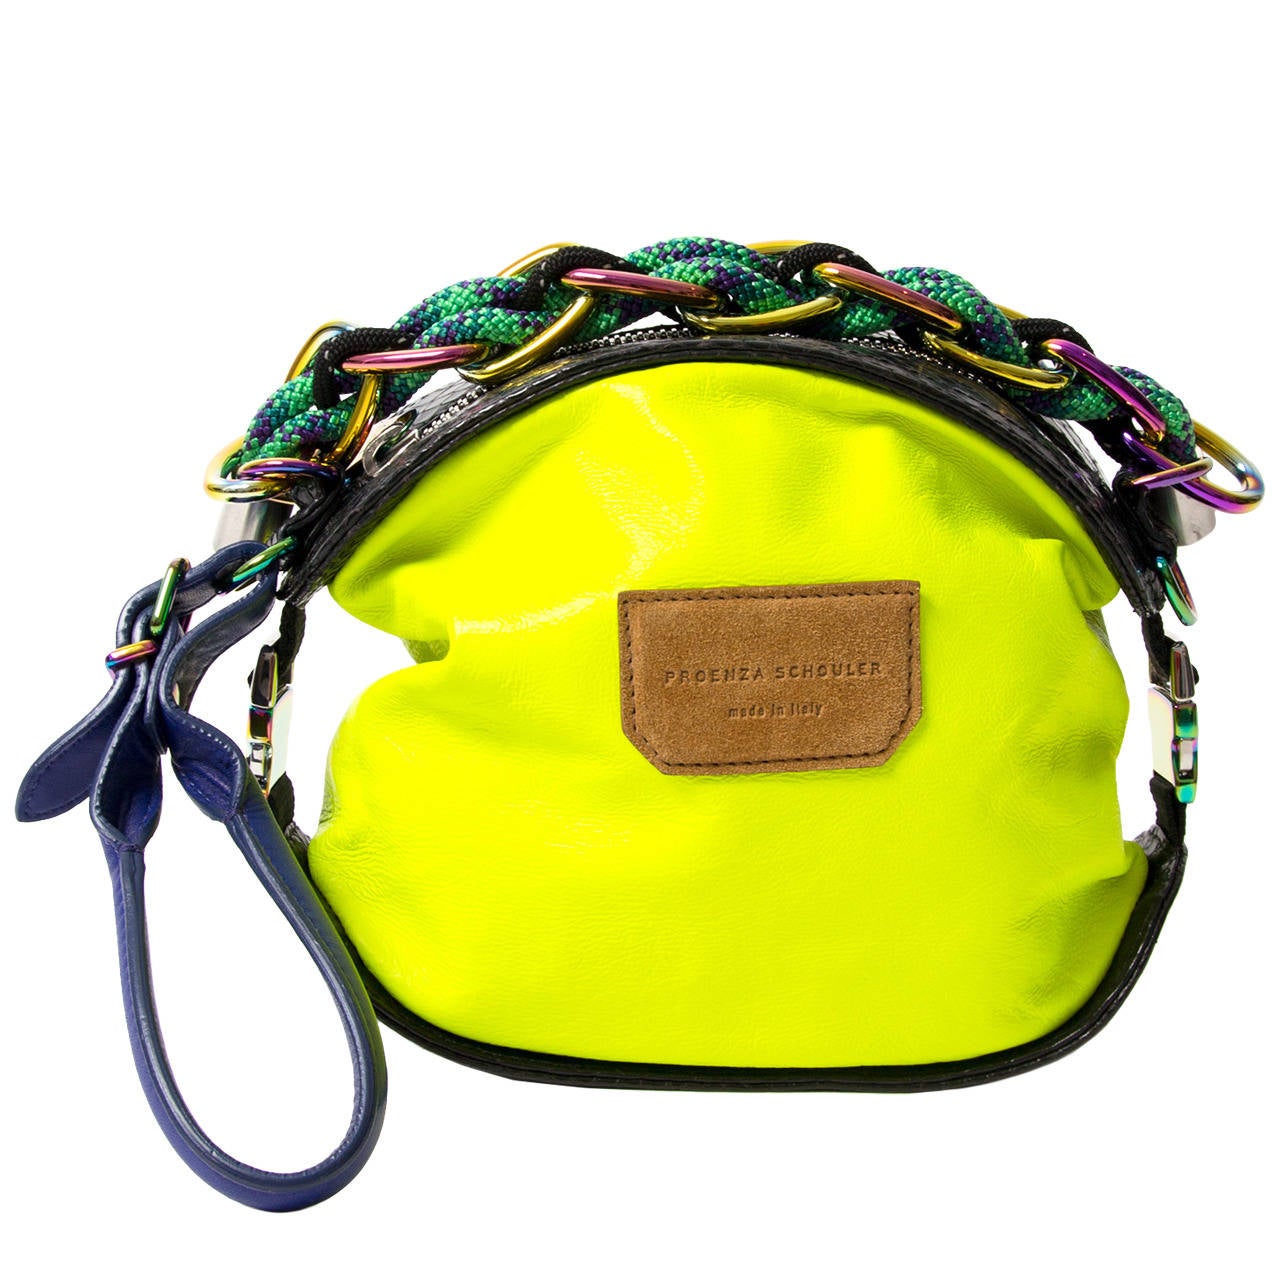 Proenza Schouler Limited Edition Neon Small Bag